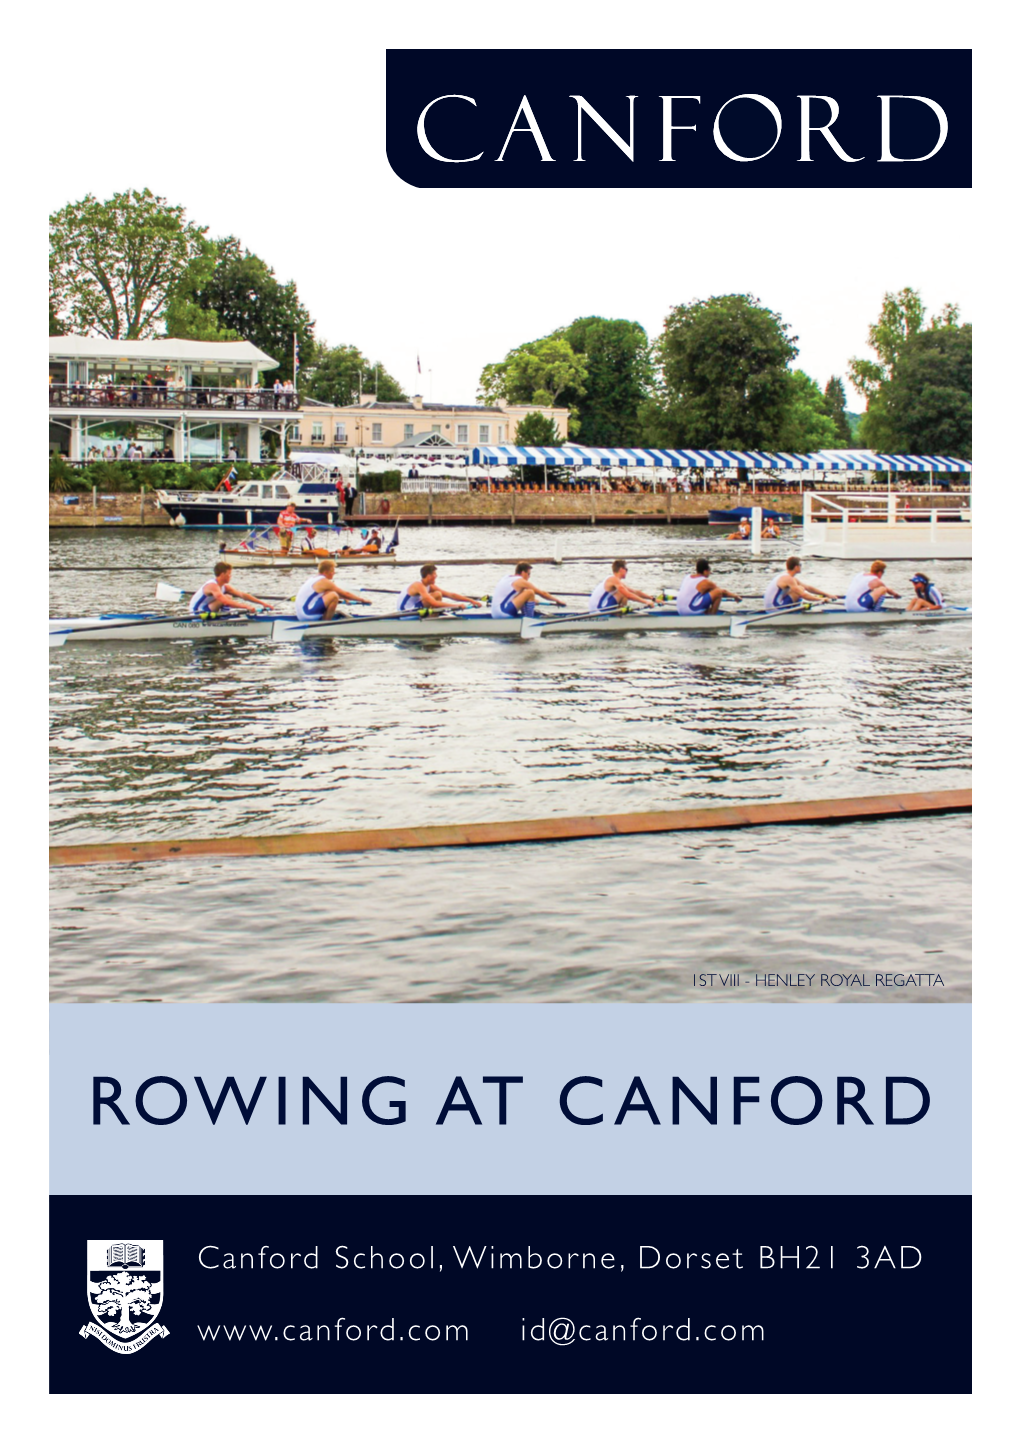 Rowing at Canford